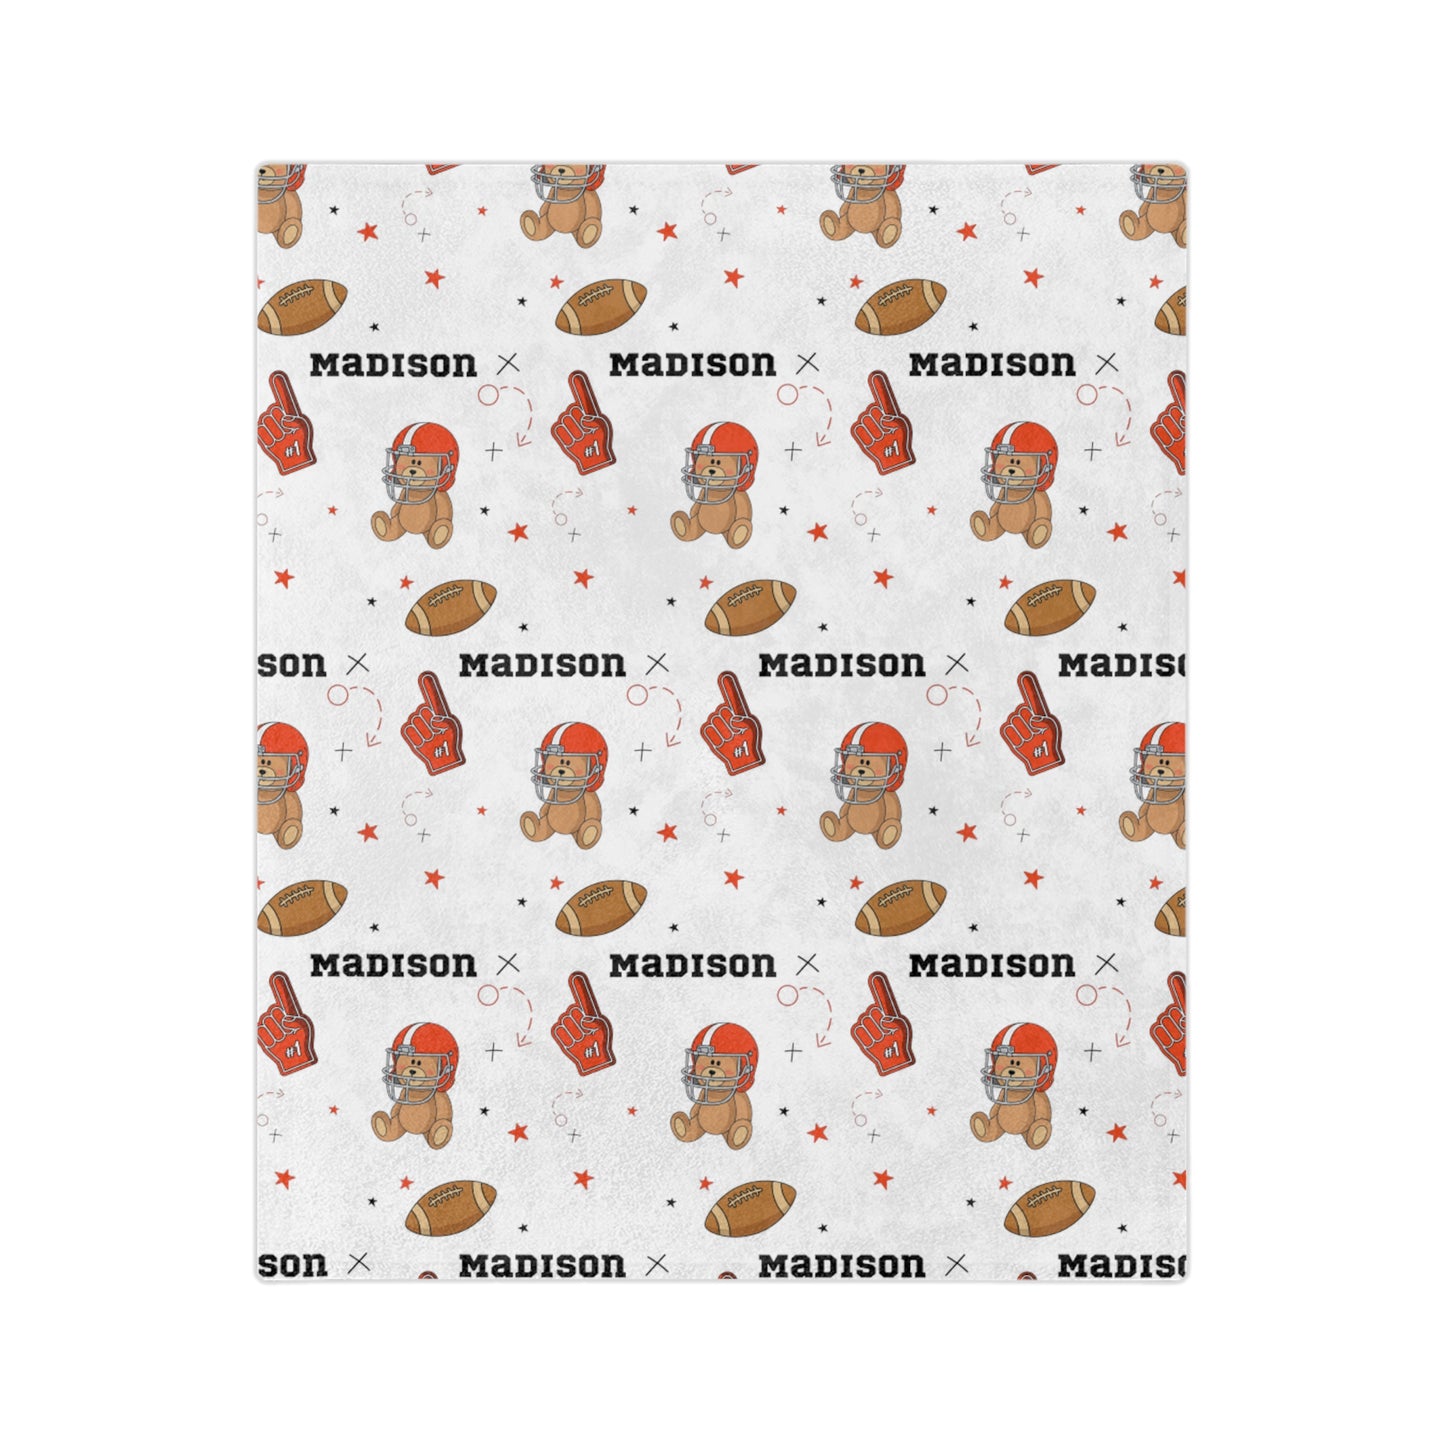 Bear NFL Game Personalized Blanket